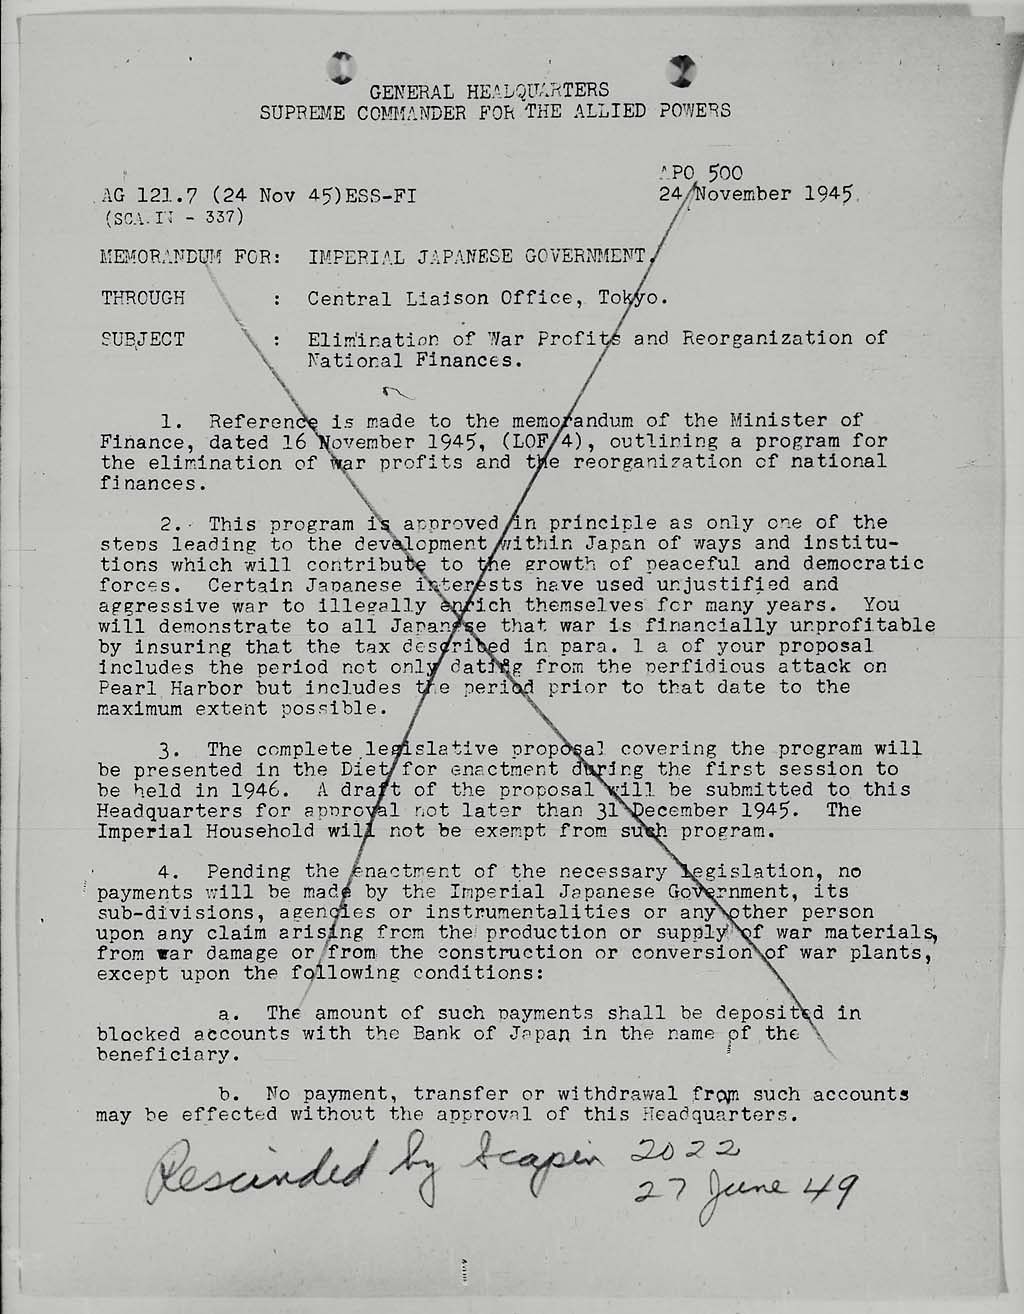 Memorandum for: Imperial Japanese Government. Through: Central Liaison Office, Tokyo. Subject: Elimination of War Profits and Reorganization of National Finance(larger)